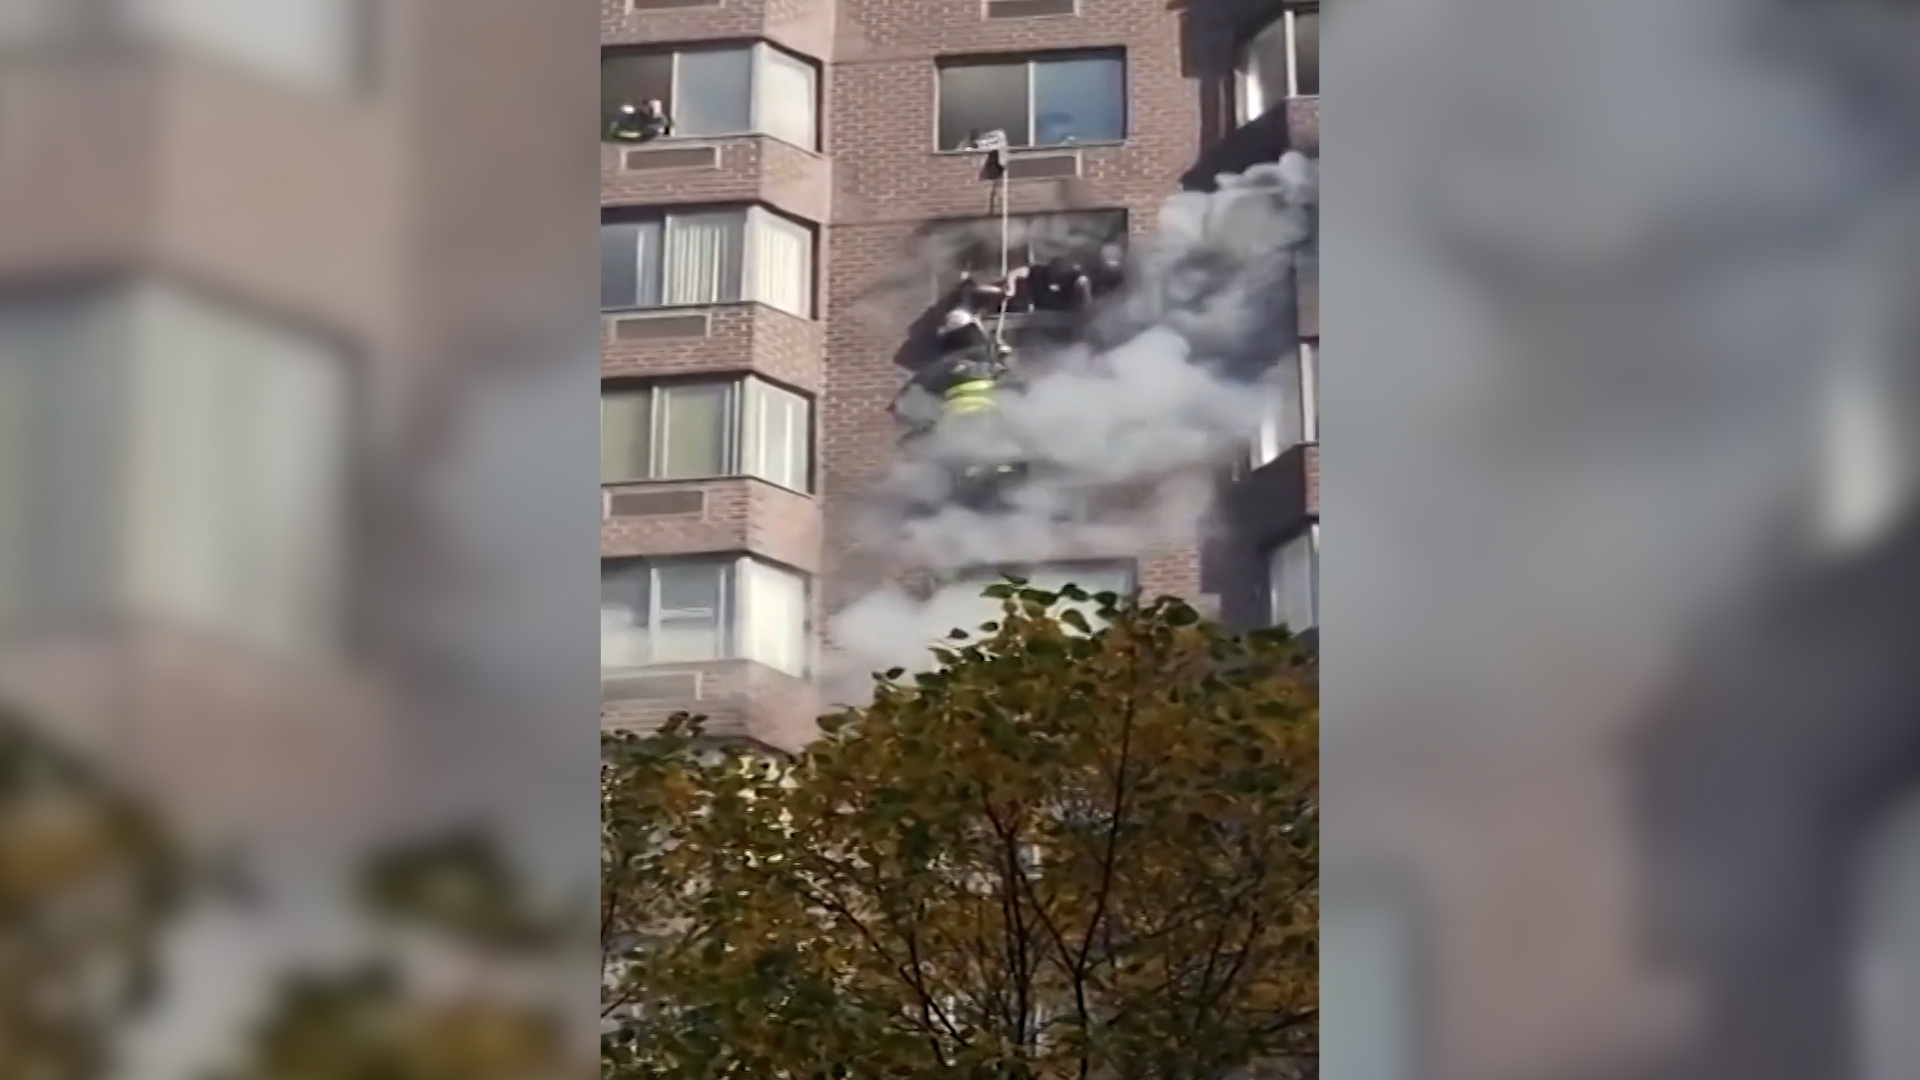 38 injured in high-rise fire in Midtown sparked by a lithium-ion battery